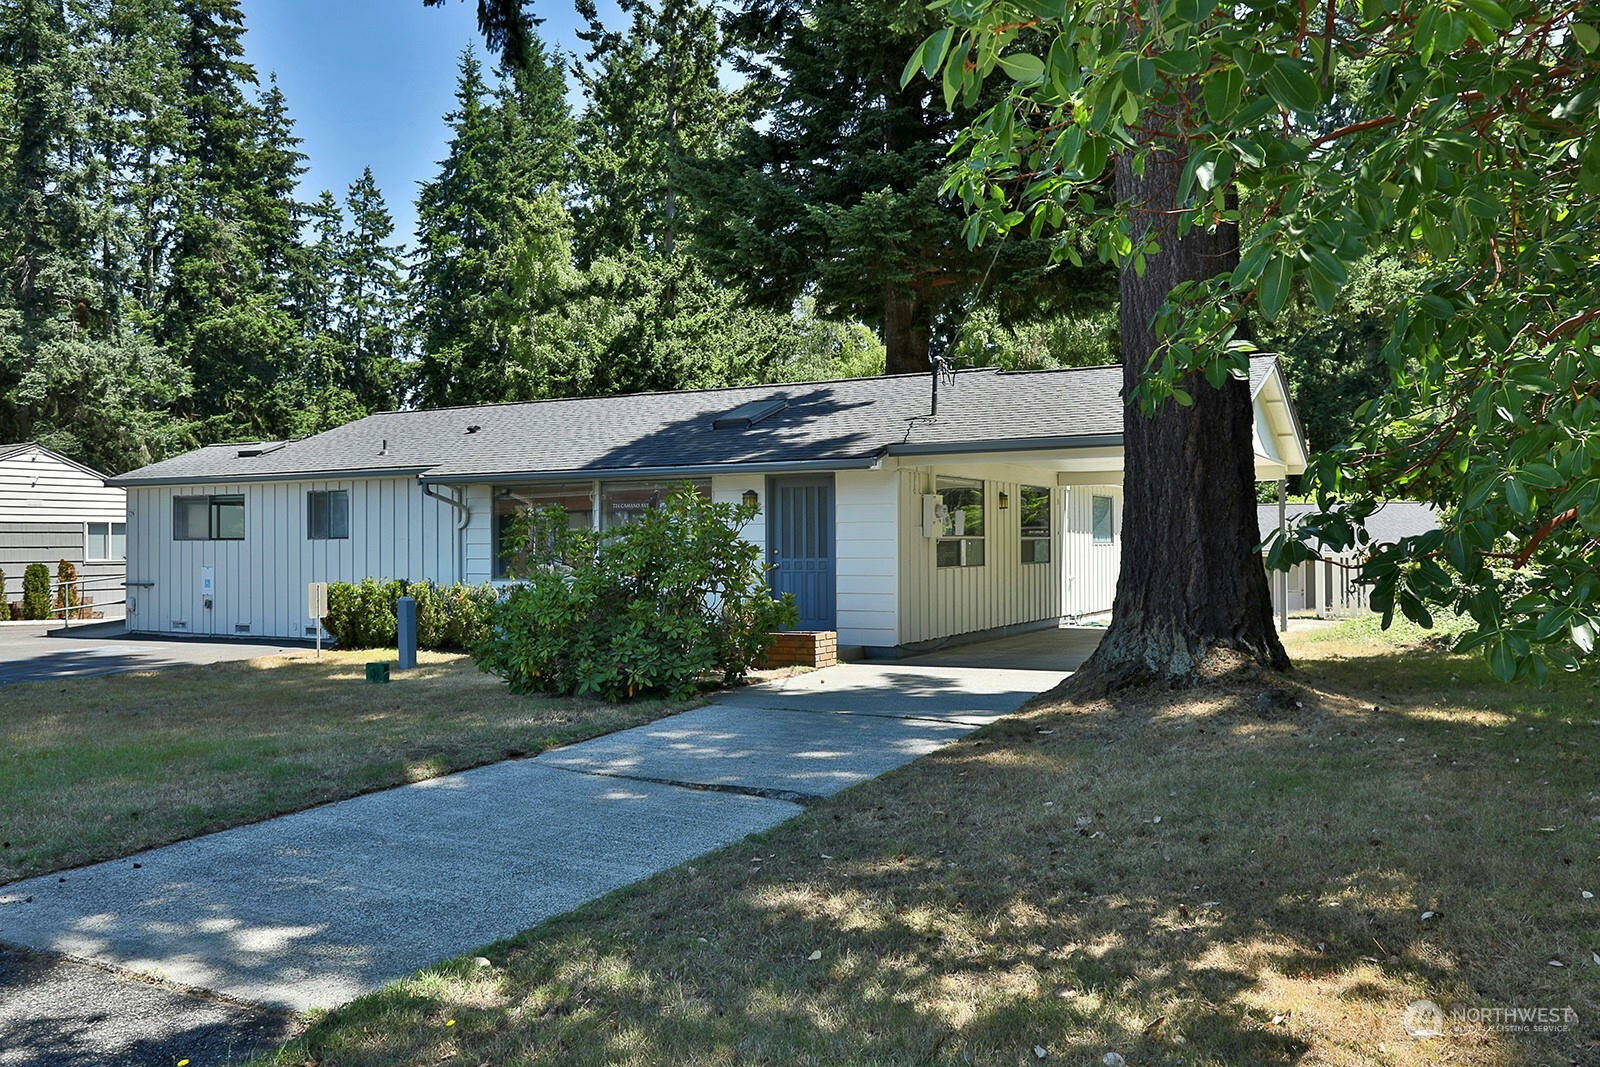 A new group in Langley is collecting pledges to buy this house as a shelter for women. (Photo courtesy of RE/MAX)